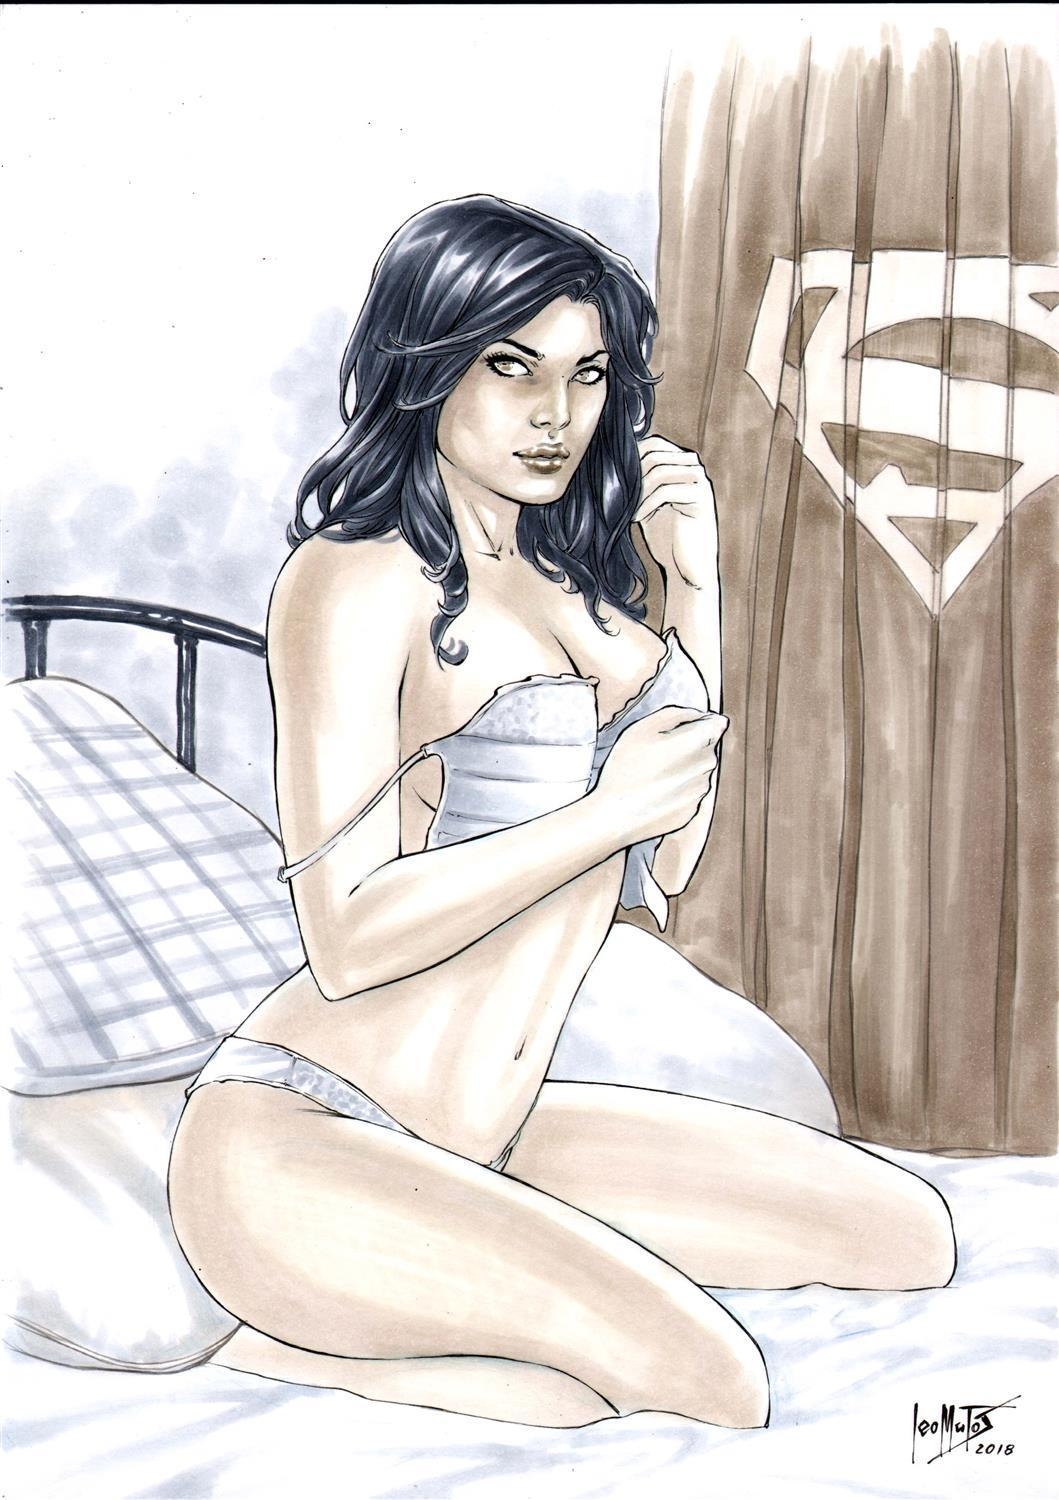 Comic Art Shop Phillip Andersons Comic Art Shop Lois Lane looking sexy by Leo Matos The largest selection of Original Comic Art For Sale On the Internet image